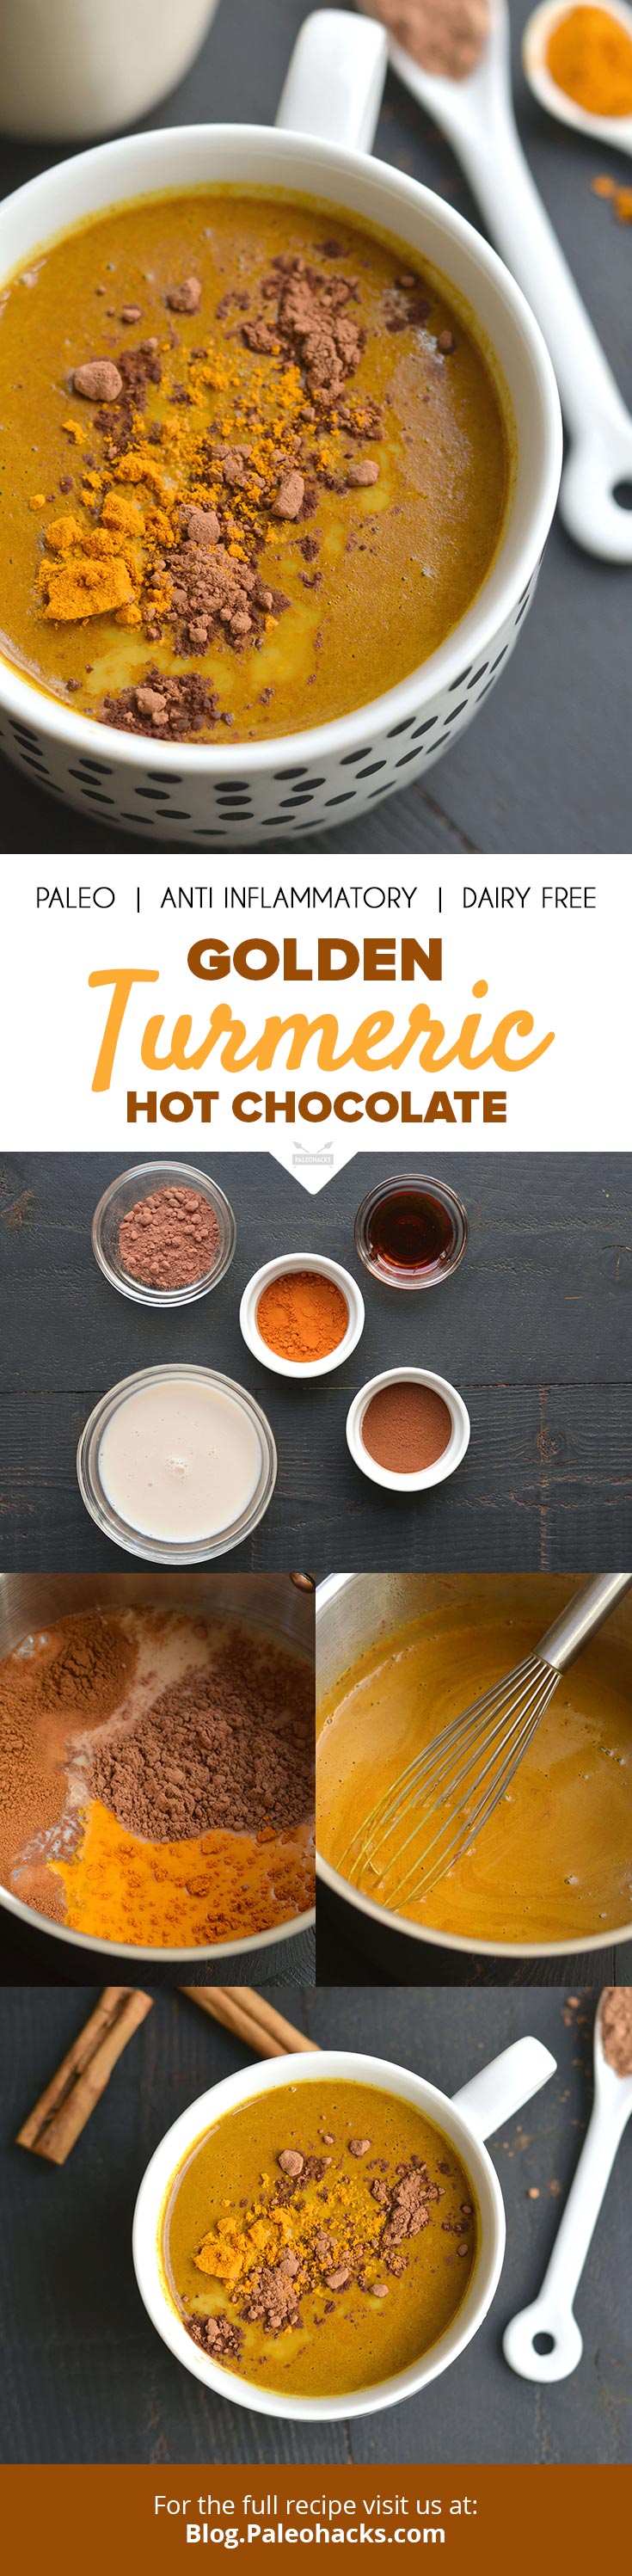 Golden milk and dark chocolate combine in this deliciously anti-inflammatory hot chocolate drink.